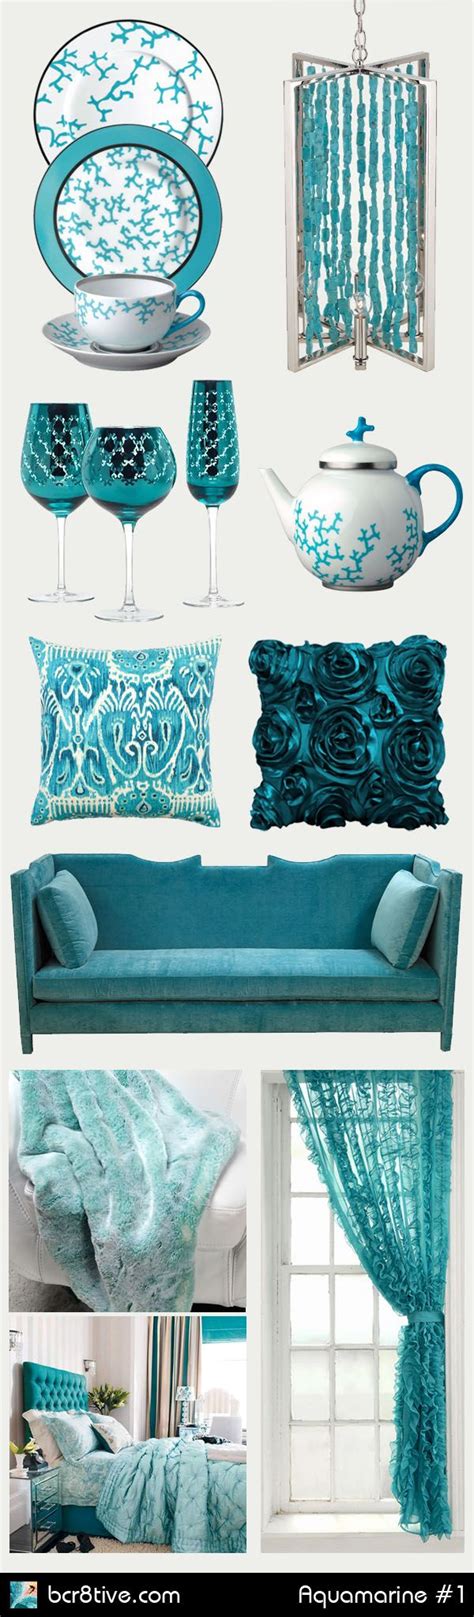 Aquamarine And Turquoise Interior Design And Home Decorating Products Be Creative Turquoise Room